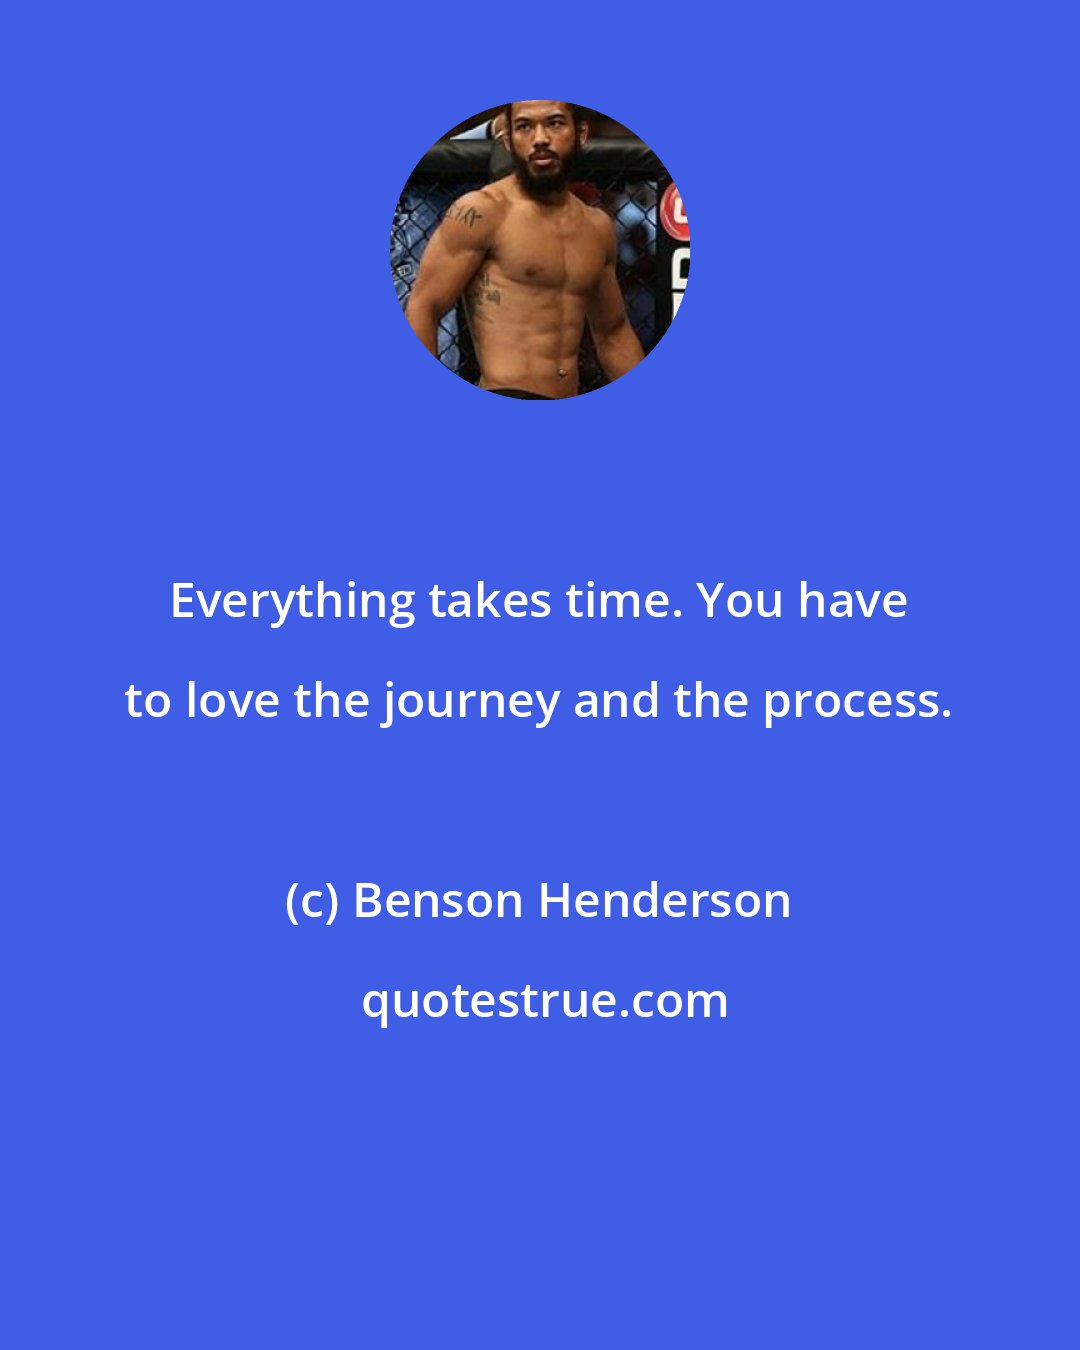 Benson Henderson: Everything takes time. You have to love the journey and the process.